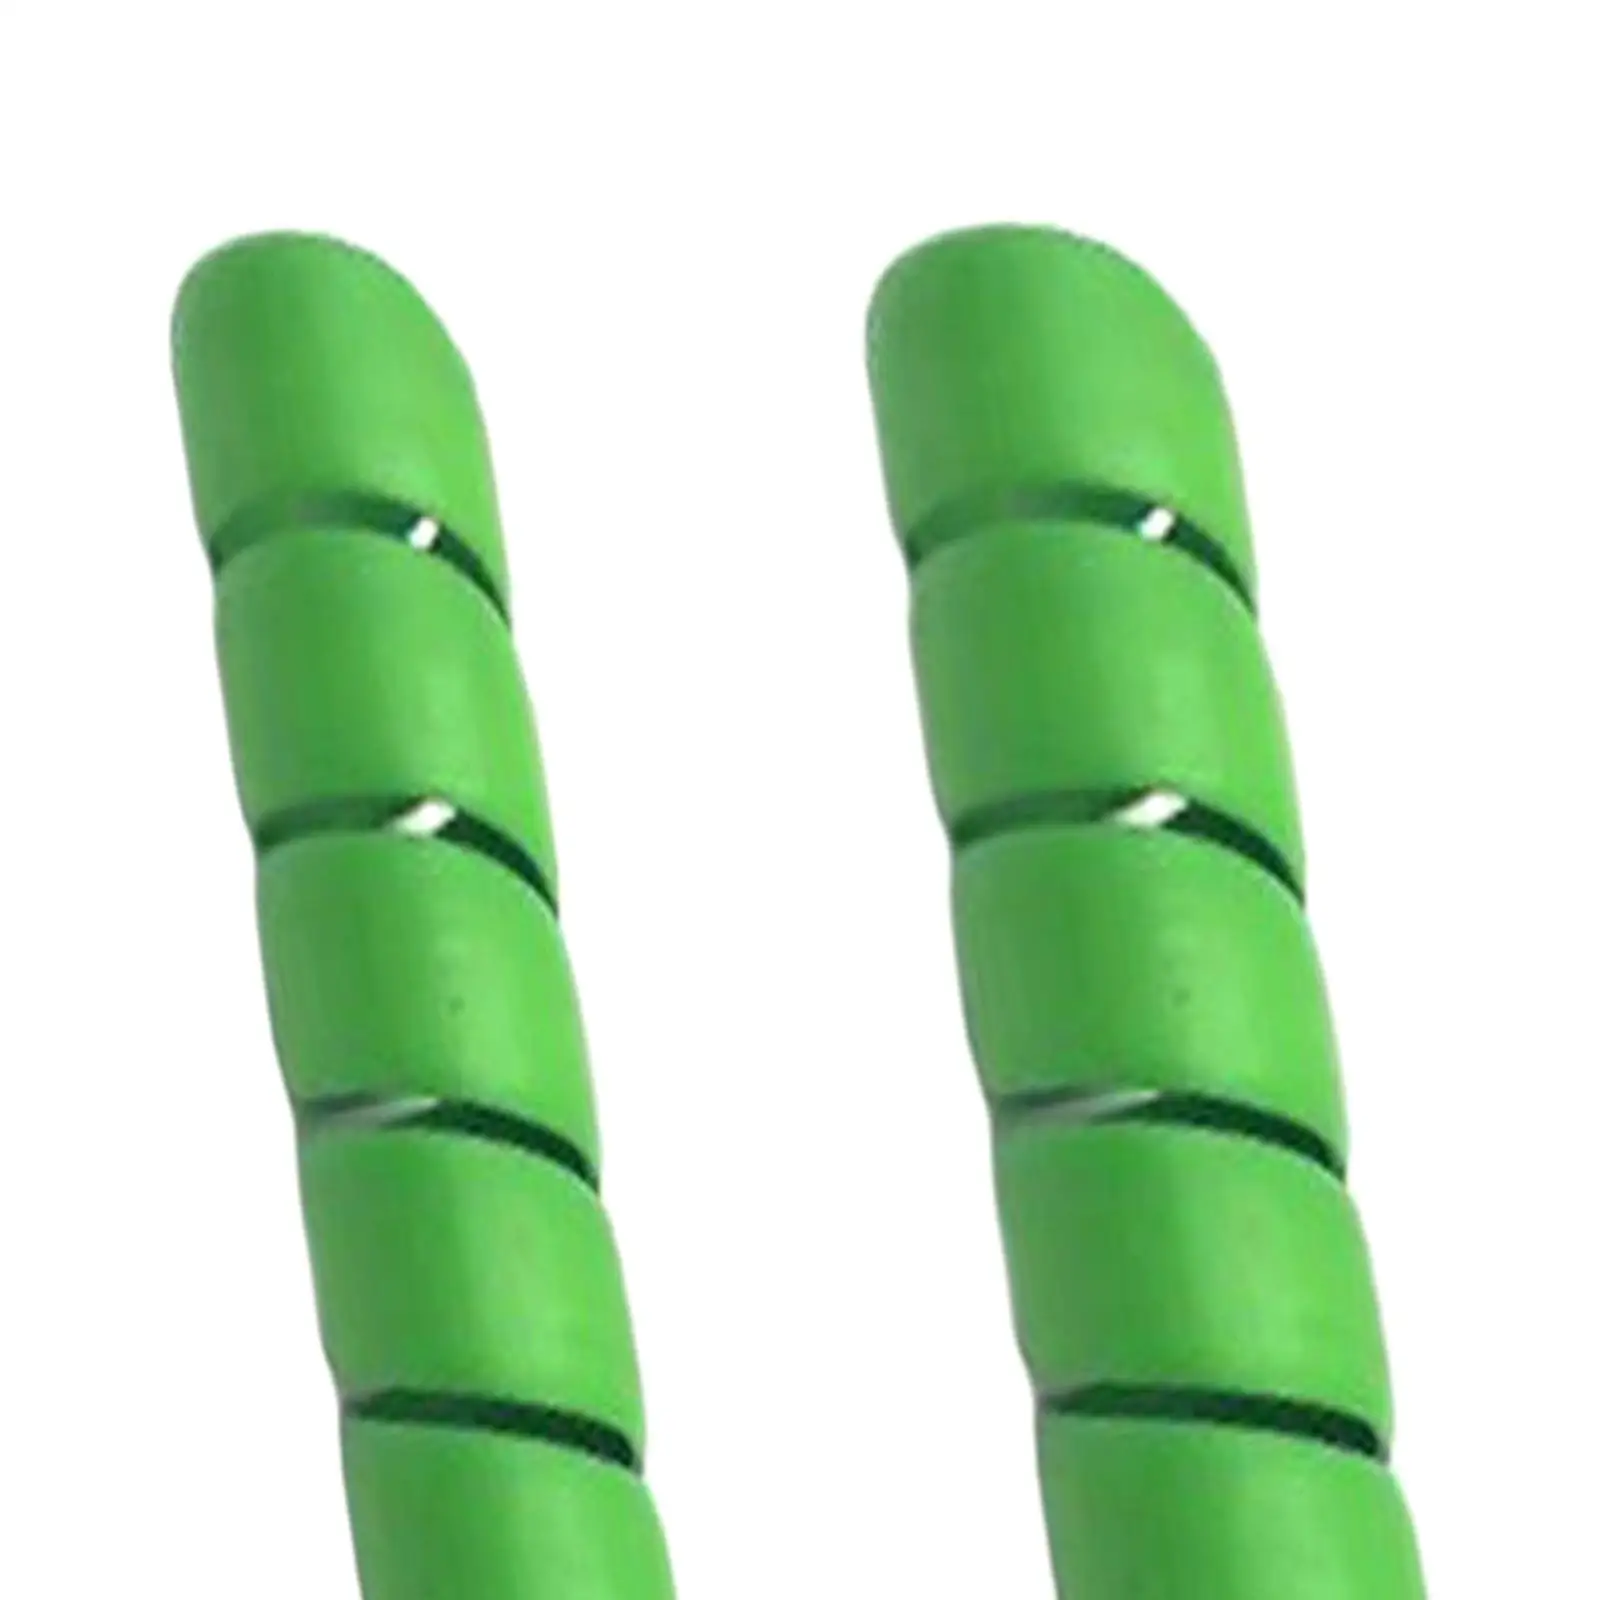 2x Tree Trunk Protector Flexible Tree Protection Anti Chewing Tree Wraps